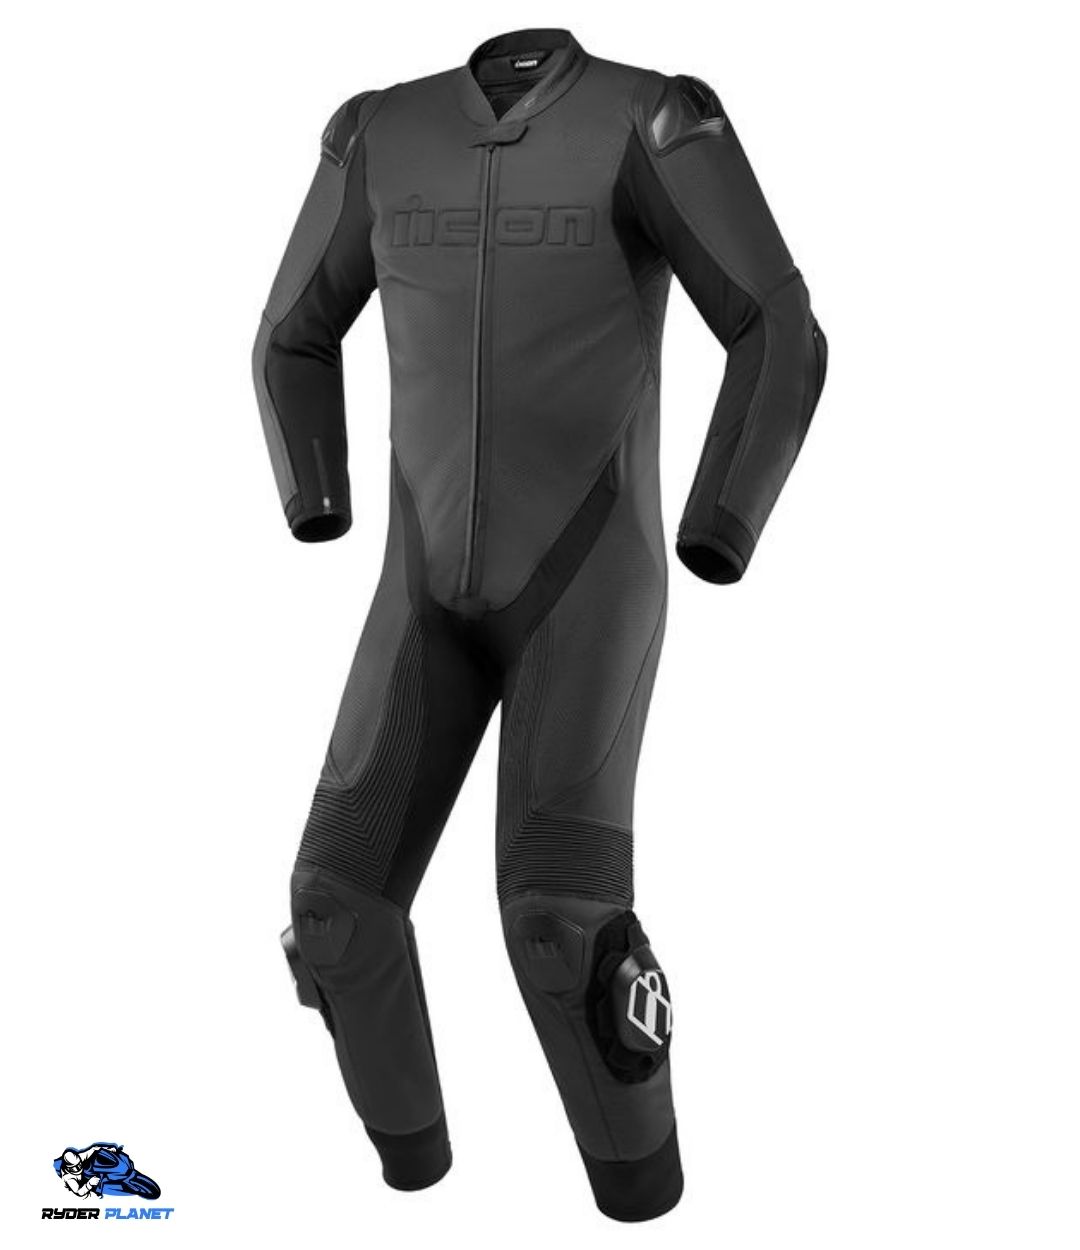 one piece motorcycle race suit -  Icon Hypersport Race Suit